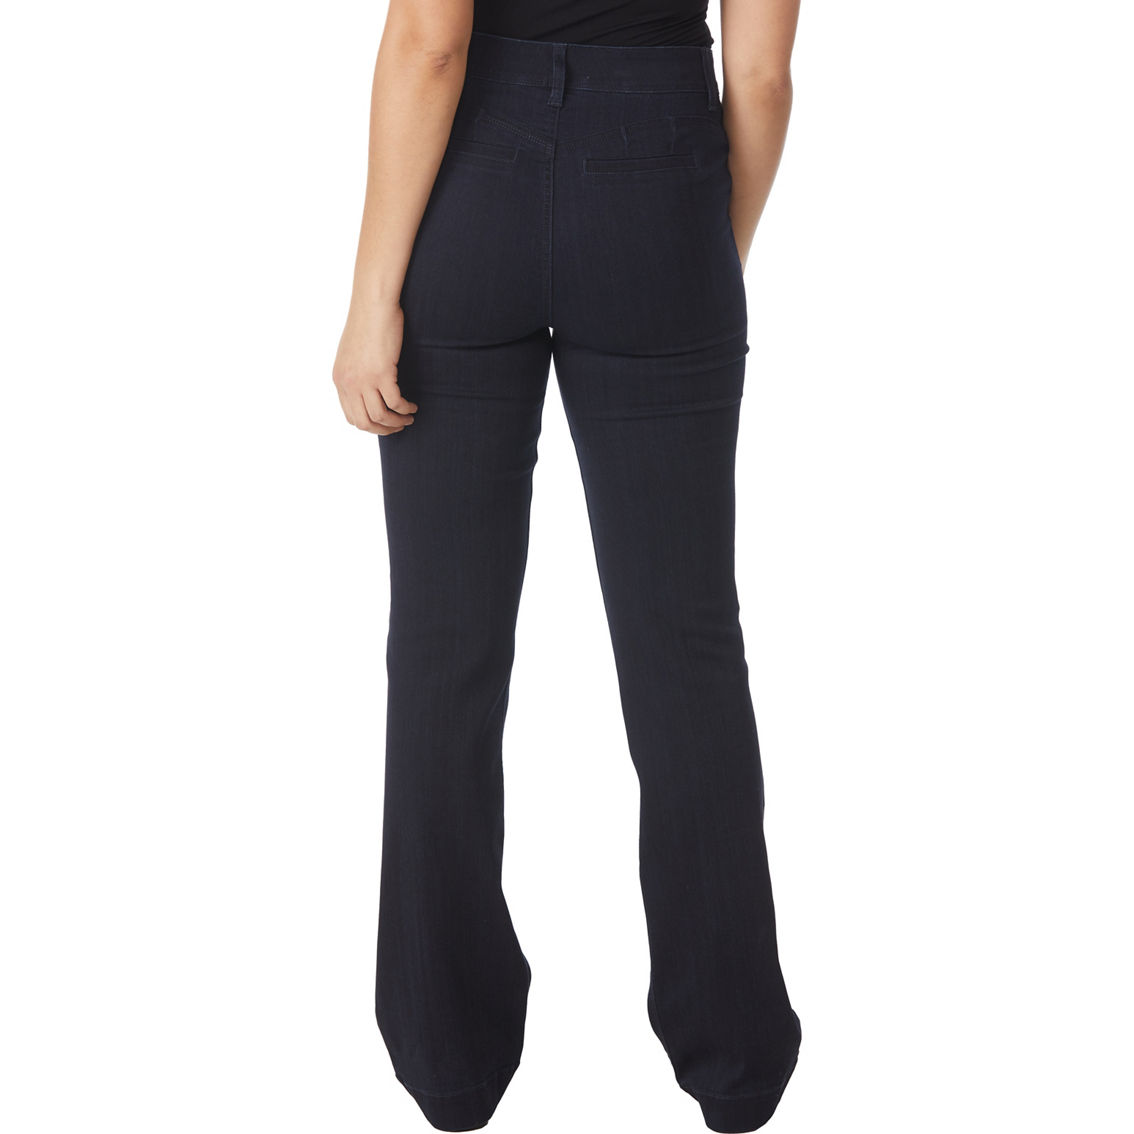 JW Fit Solution Jean Trousers - Image 2 of 3